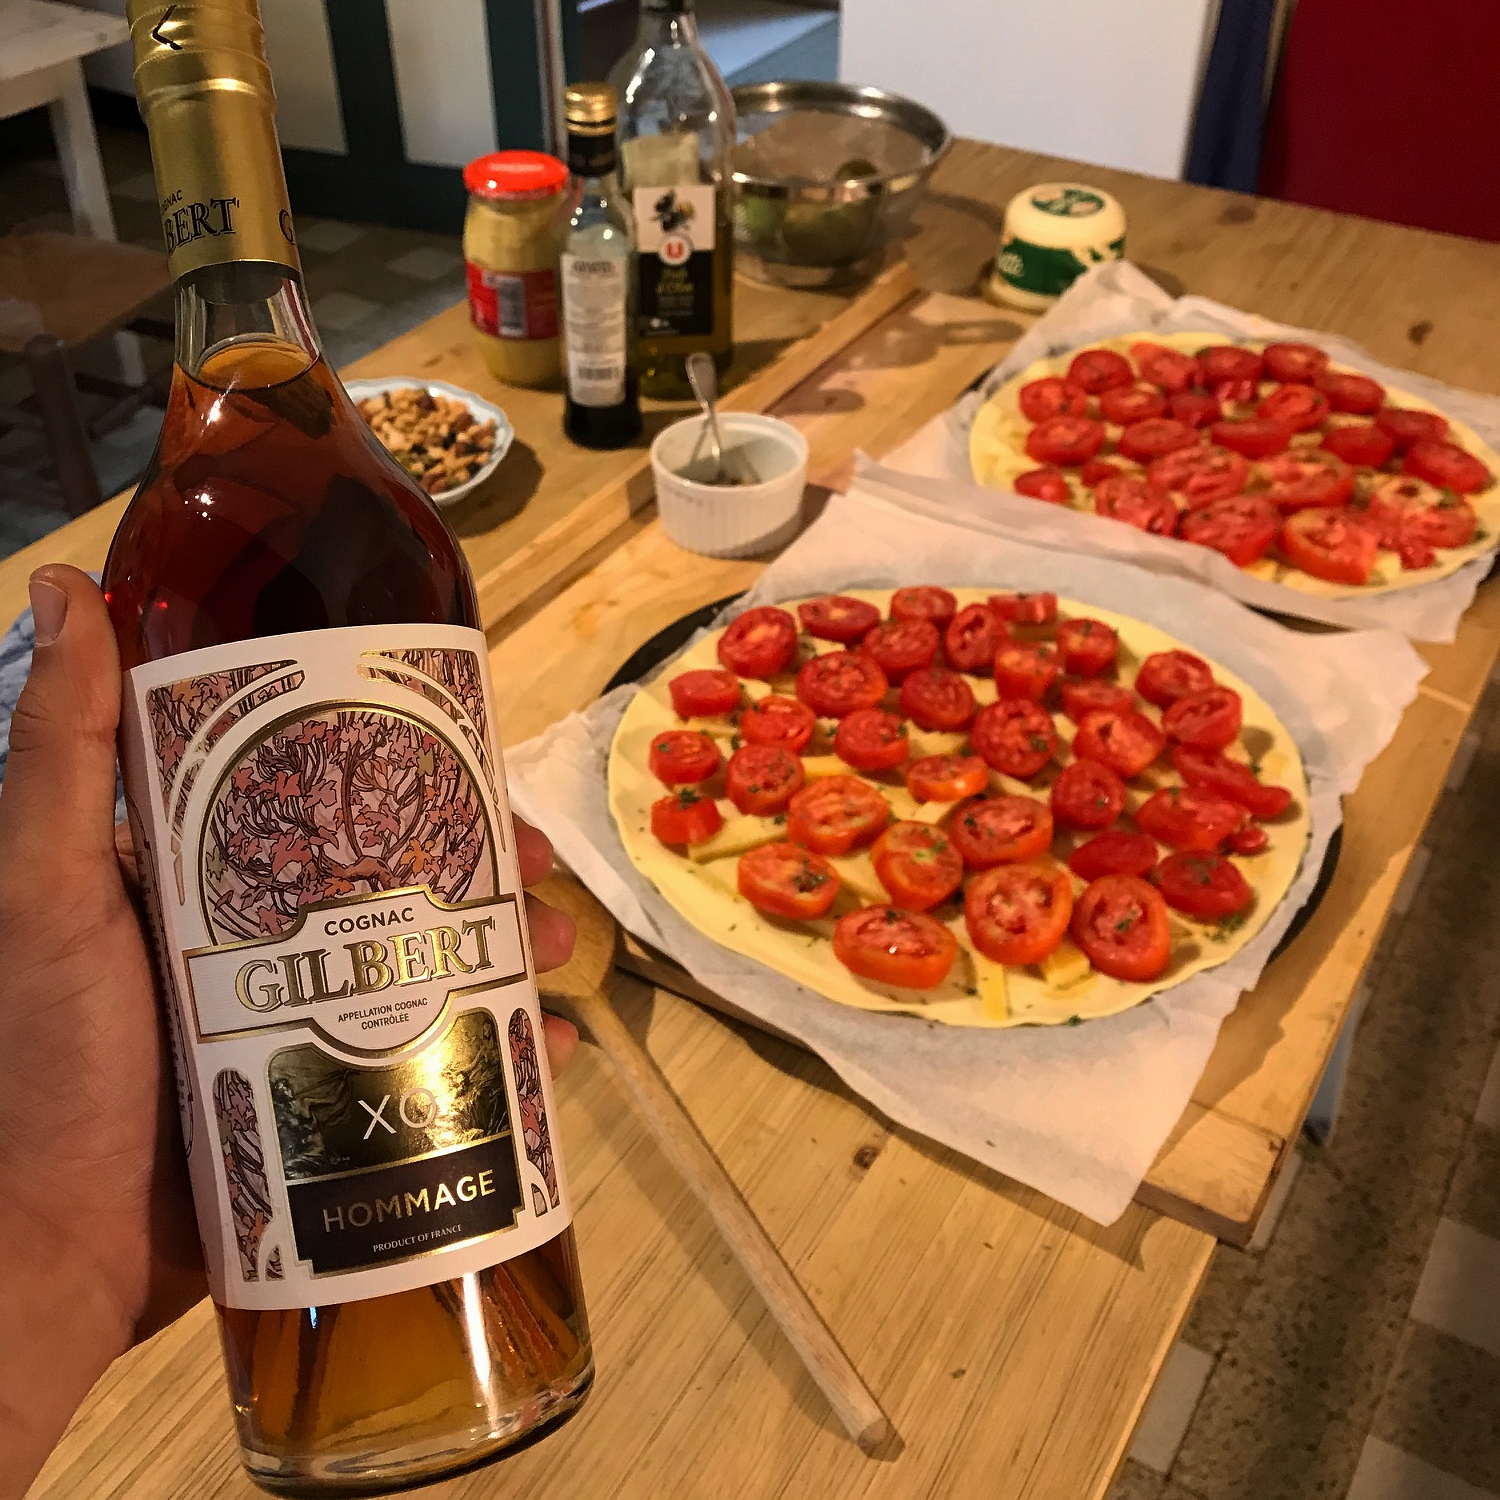 A bottle of Gilbert XO with Pizzas in the background